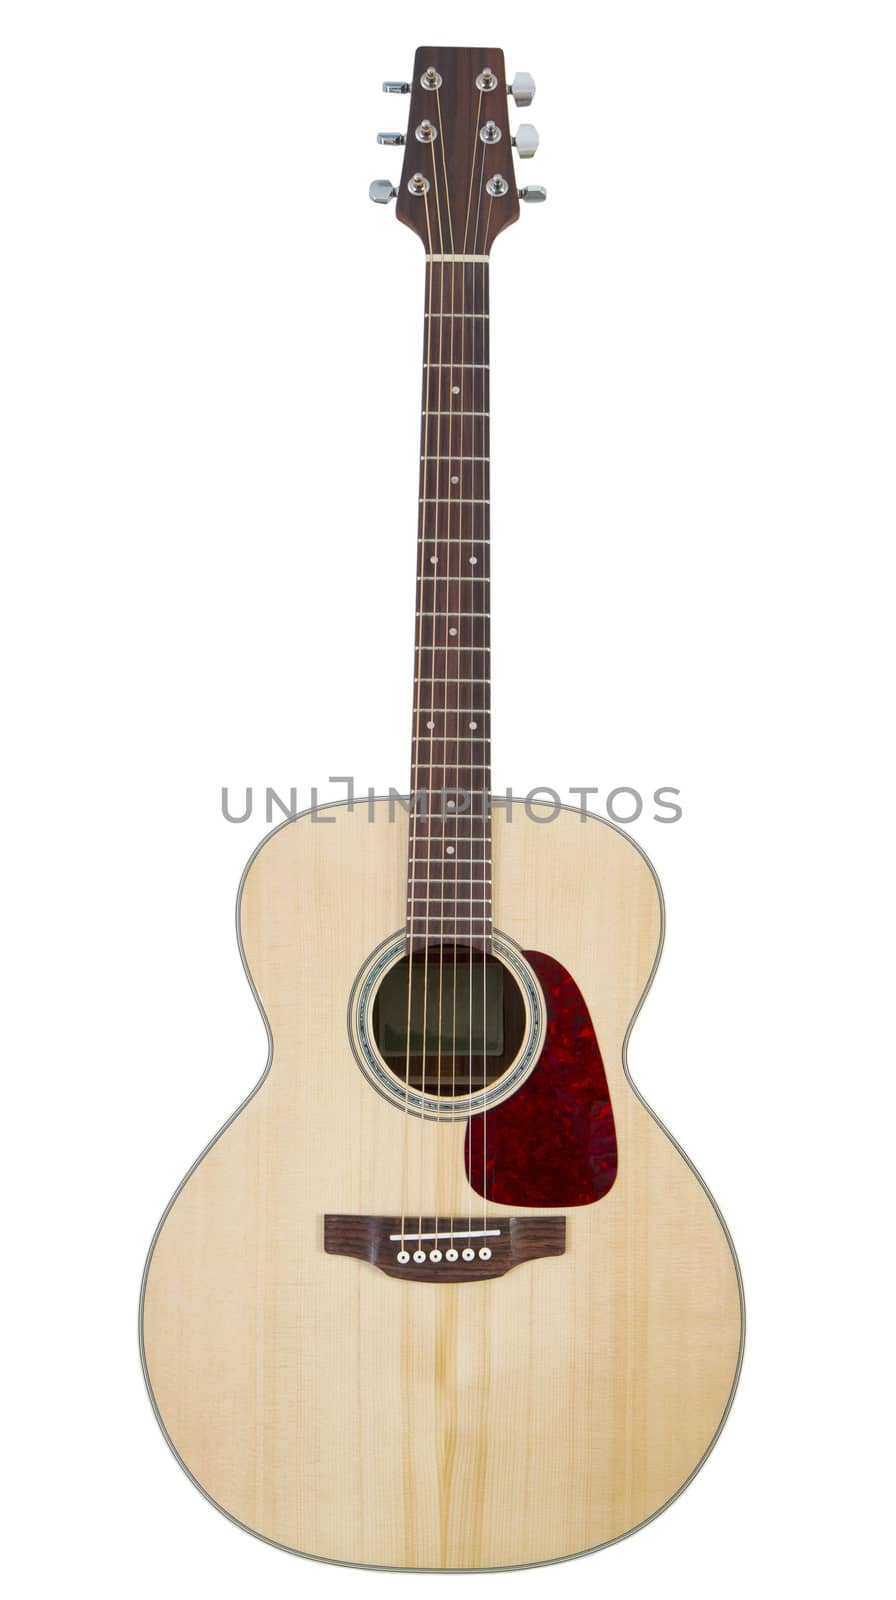 Acoustic guitar isolated on white background by drpnncpp